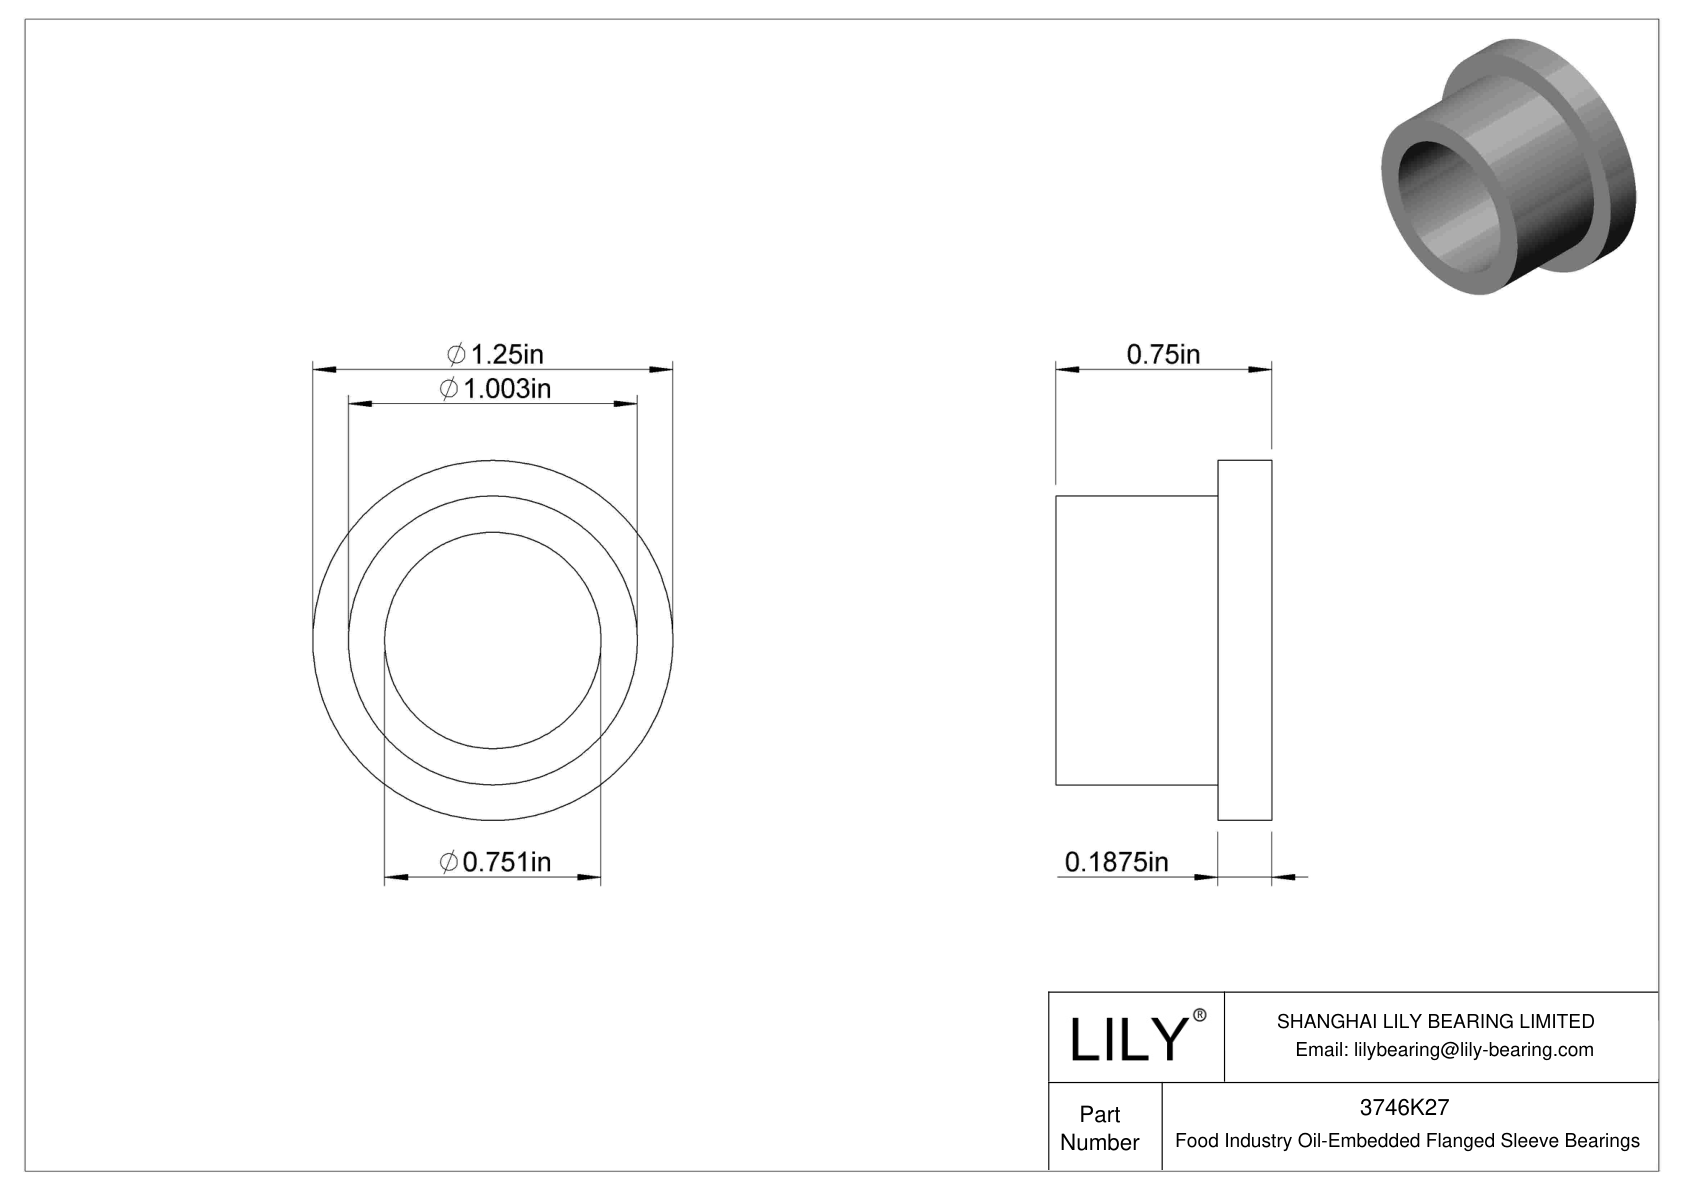 DHEGKCH Food Industry Oil-Embedded Flanged Sleeve Bearings cad drawing